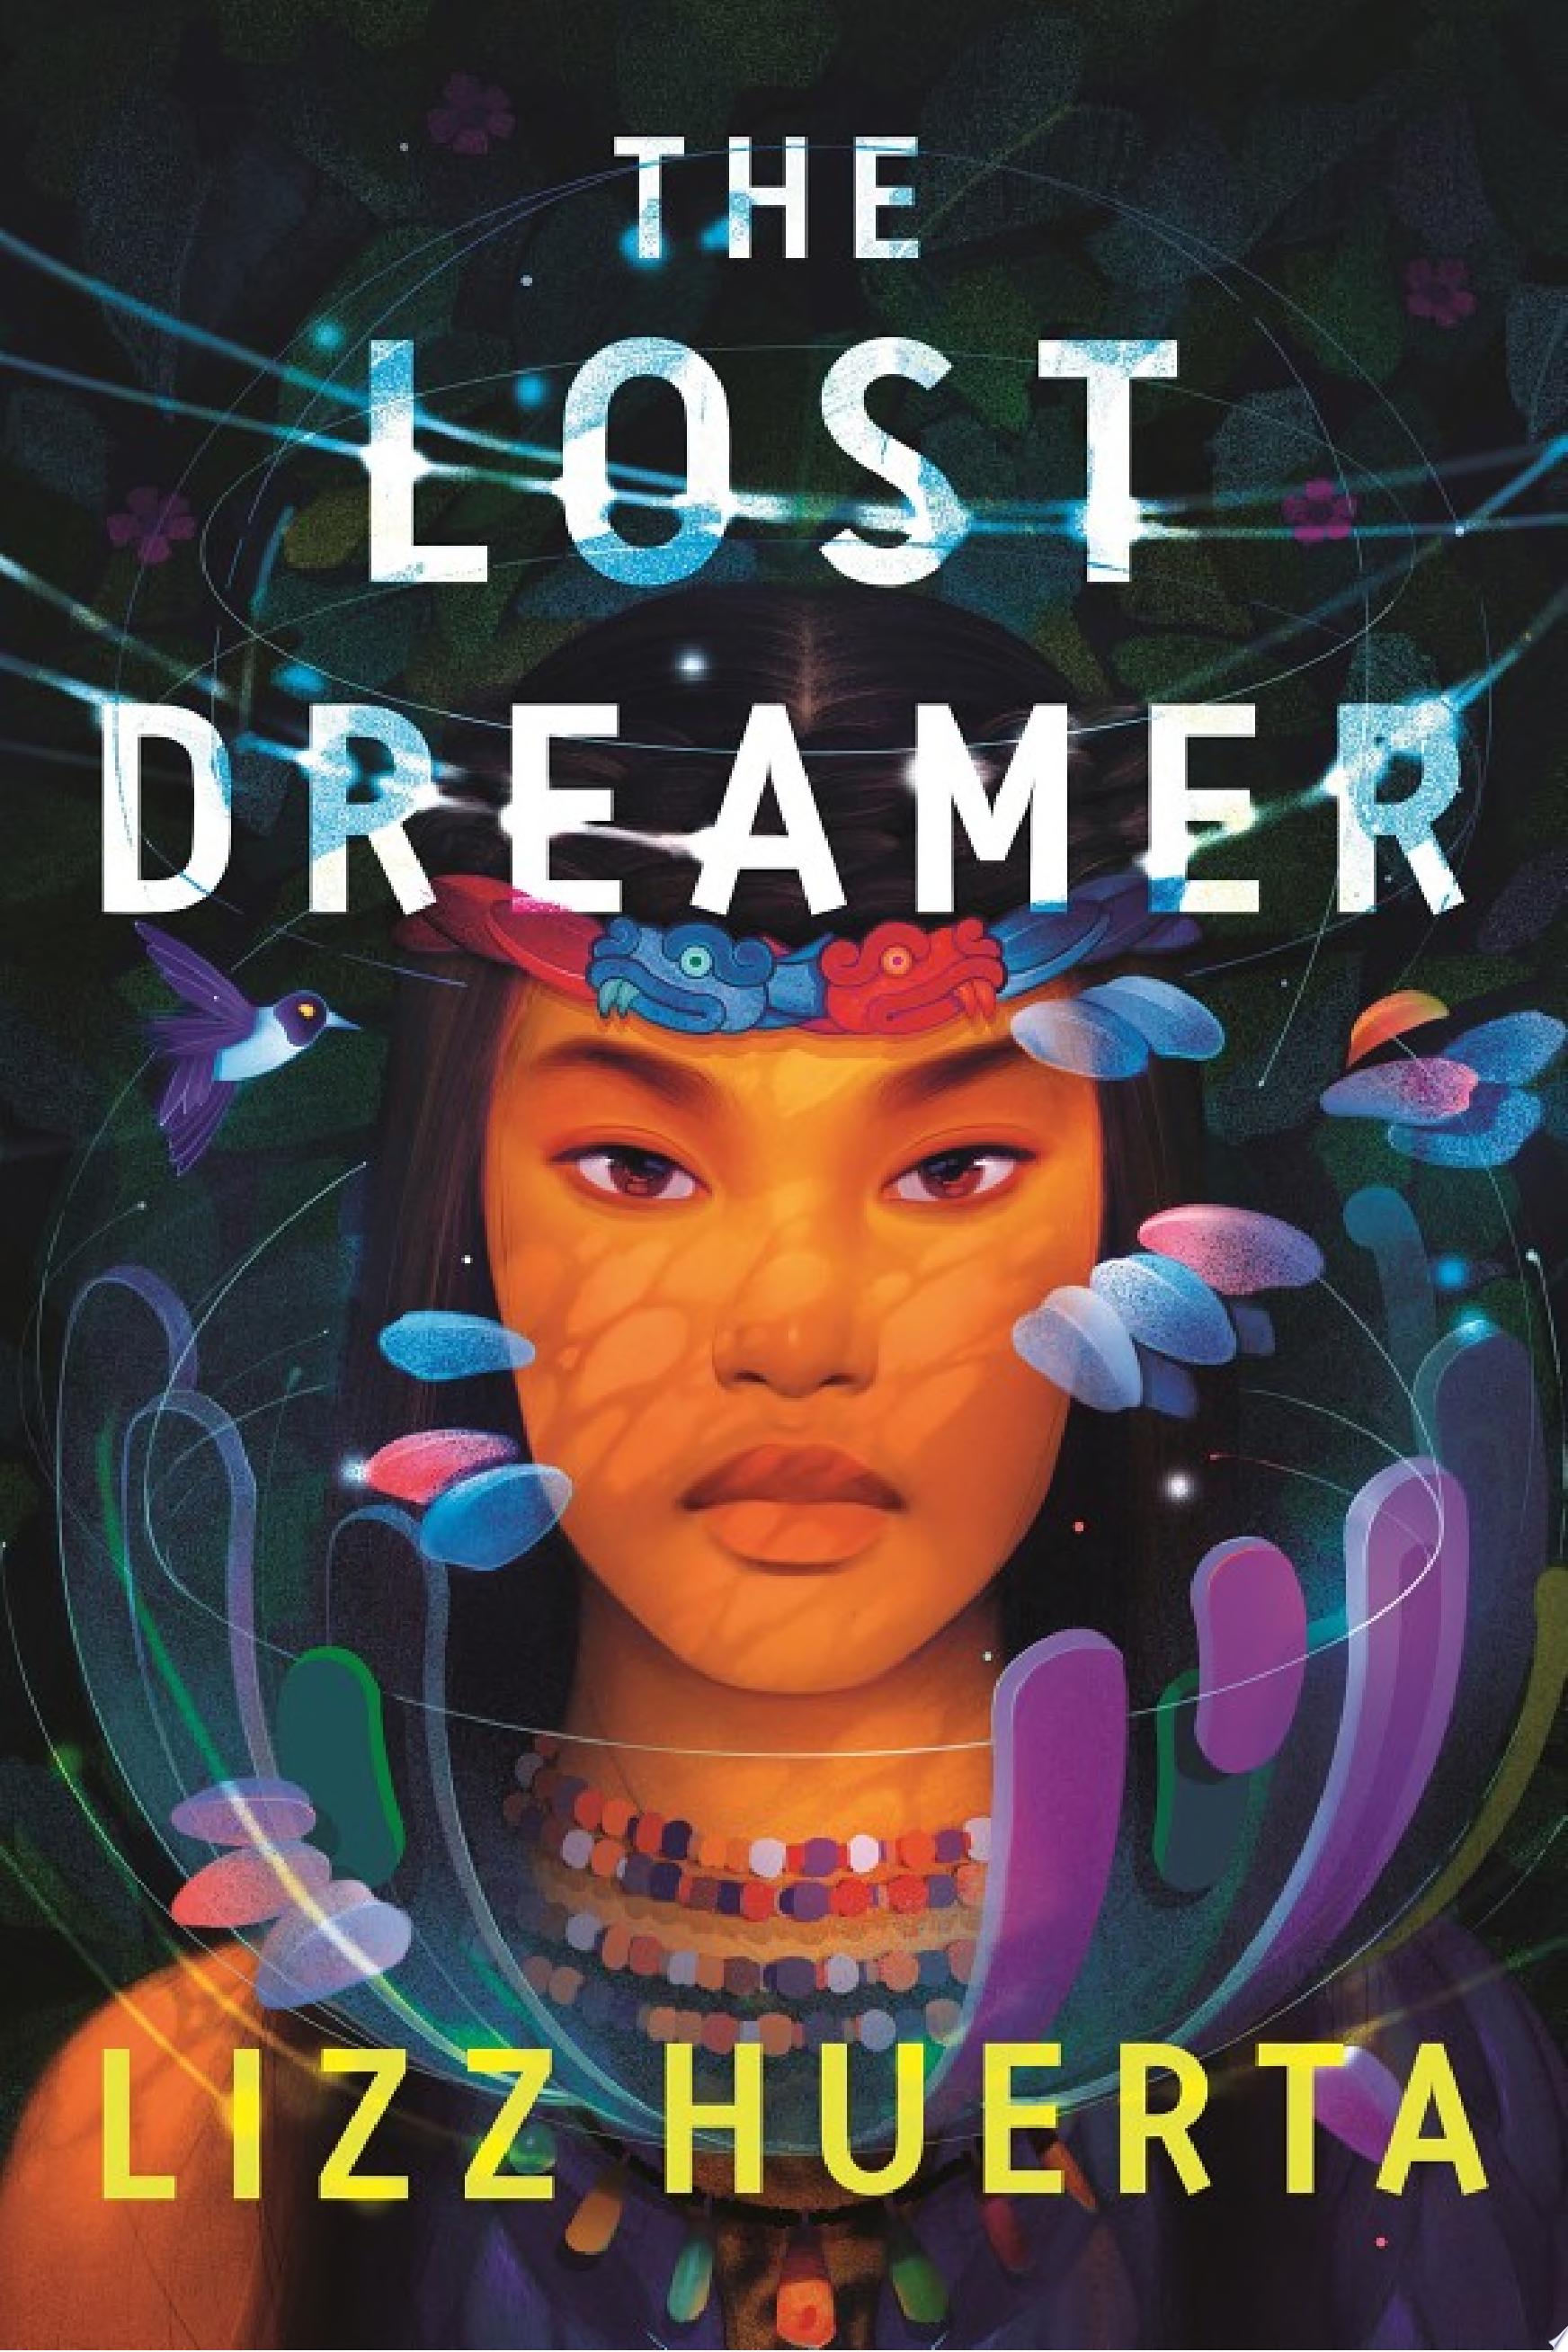 Image for "The Lost Dreamer"